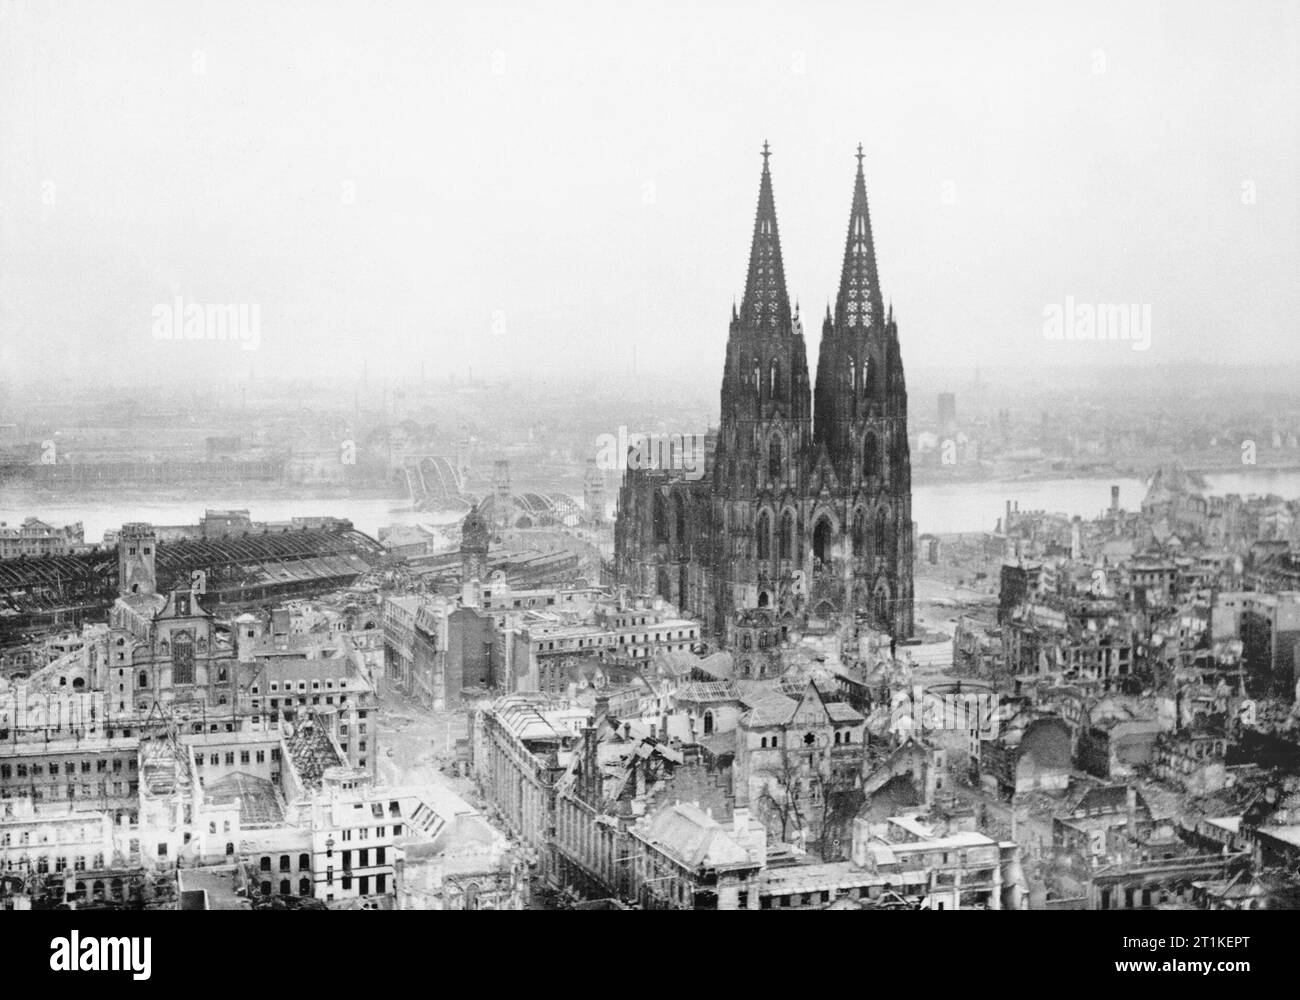 Cologne Cathedral stands intact amidst the destruction caused by Allied air raids, 9 March 1945. Aerial oblique view of destroyed buildings in Cologne, Germany, caused by RAF Bomber Command raids on 9 March 1945. Stock Photo